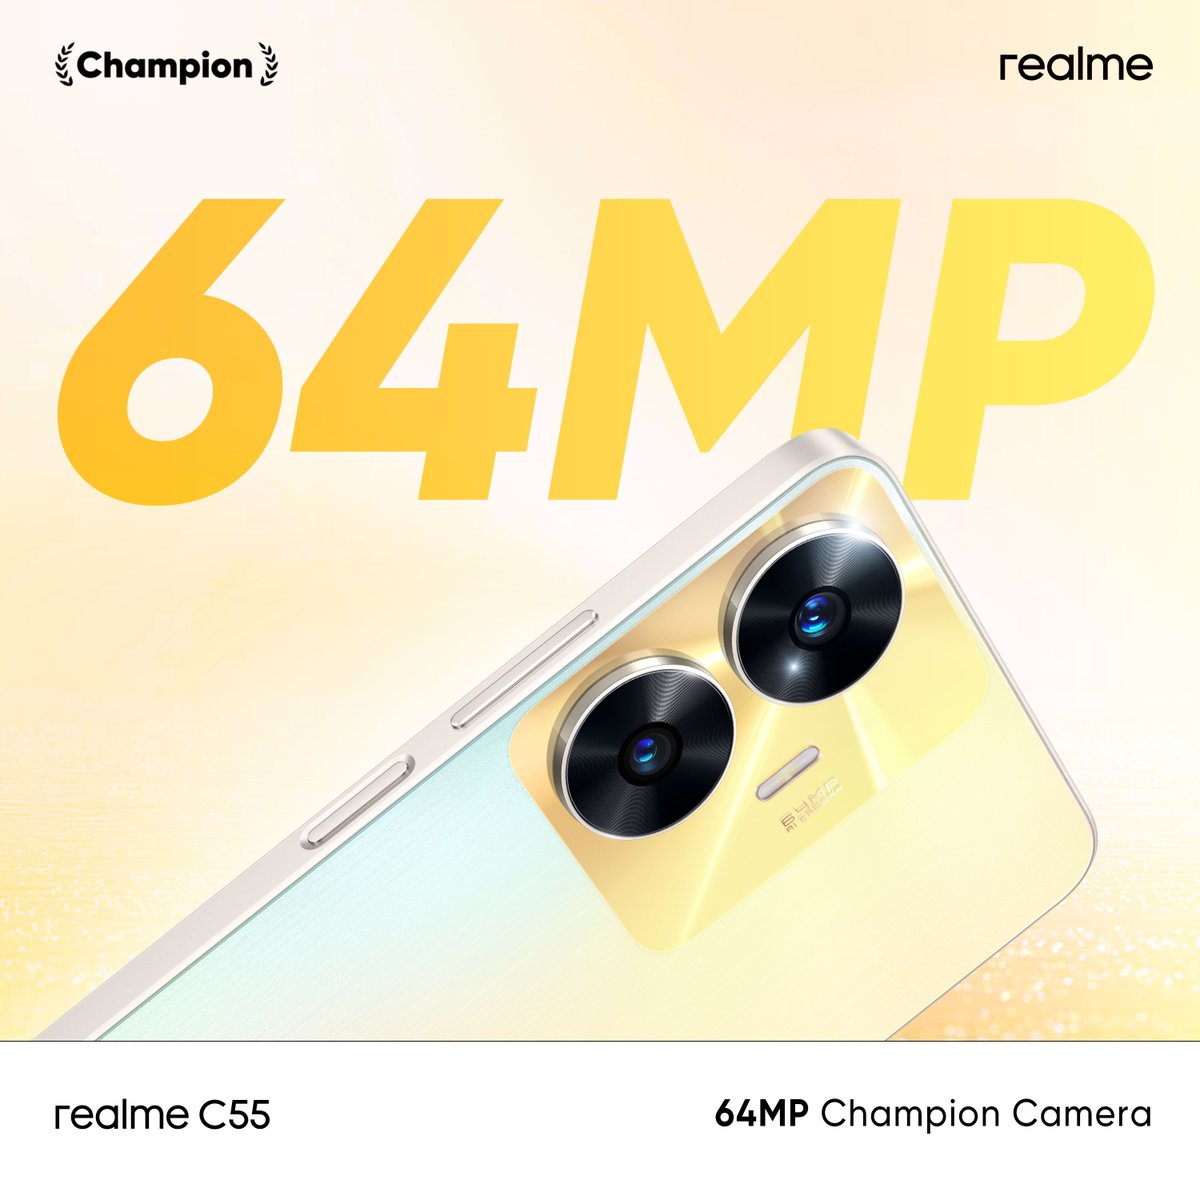 Capturing life in stunning detail with the 64MP champion camera on the realme C55! 📸✨ #realmeC55 #ChampionCamera #ChampionMemory